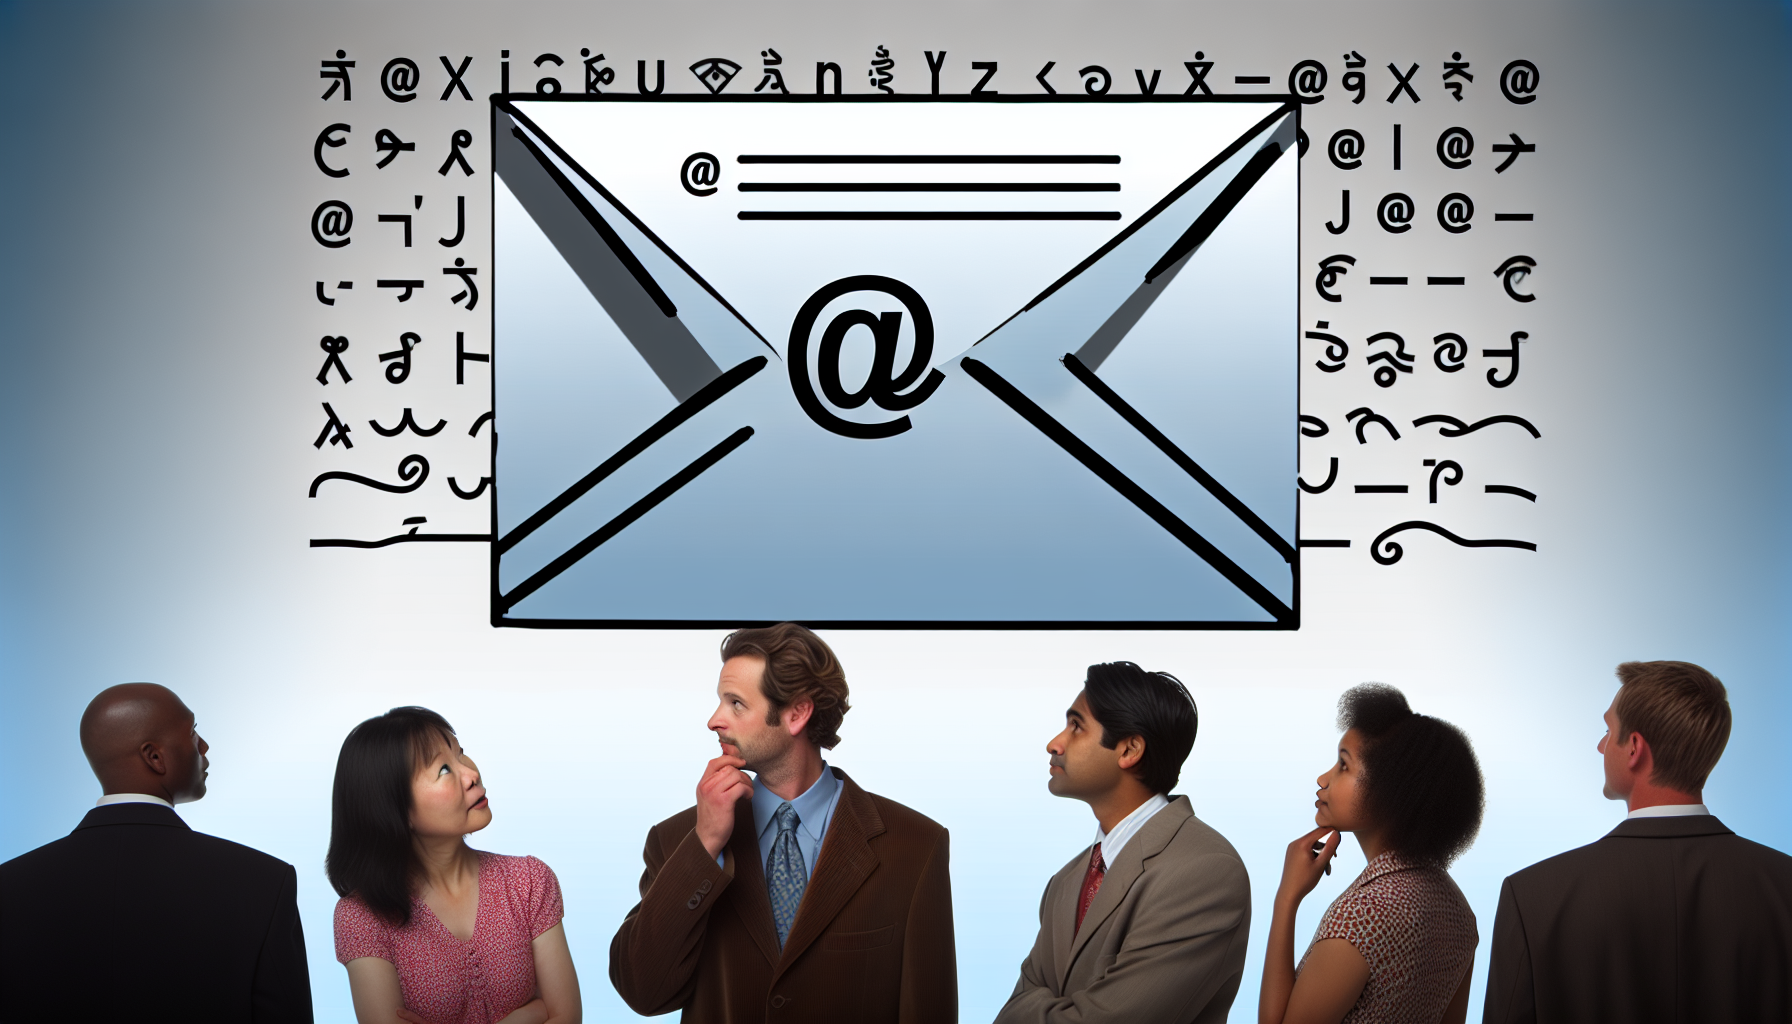 Special Characters and International Symbols in Email Addresses with capital letters in email